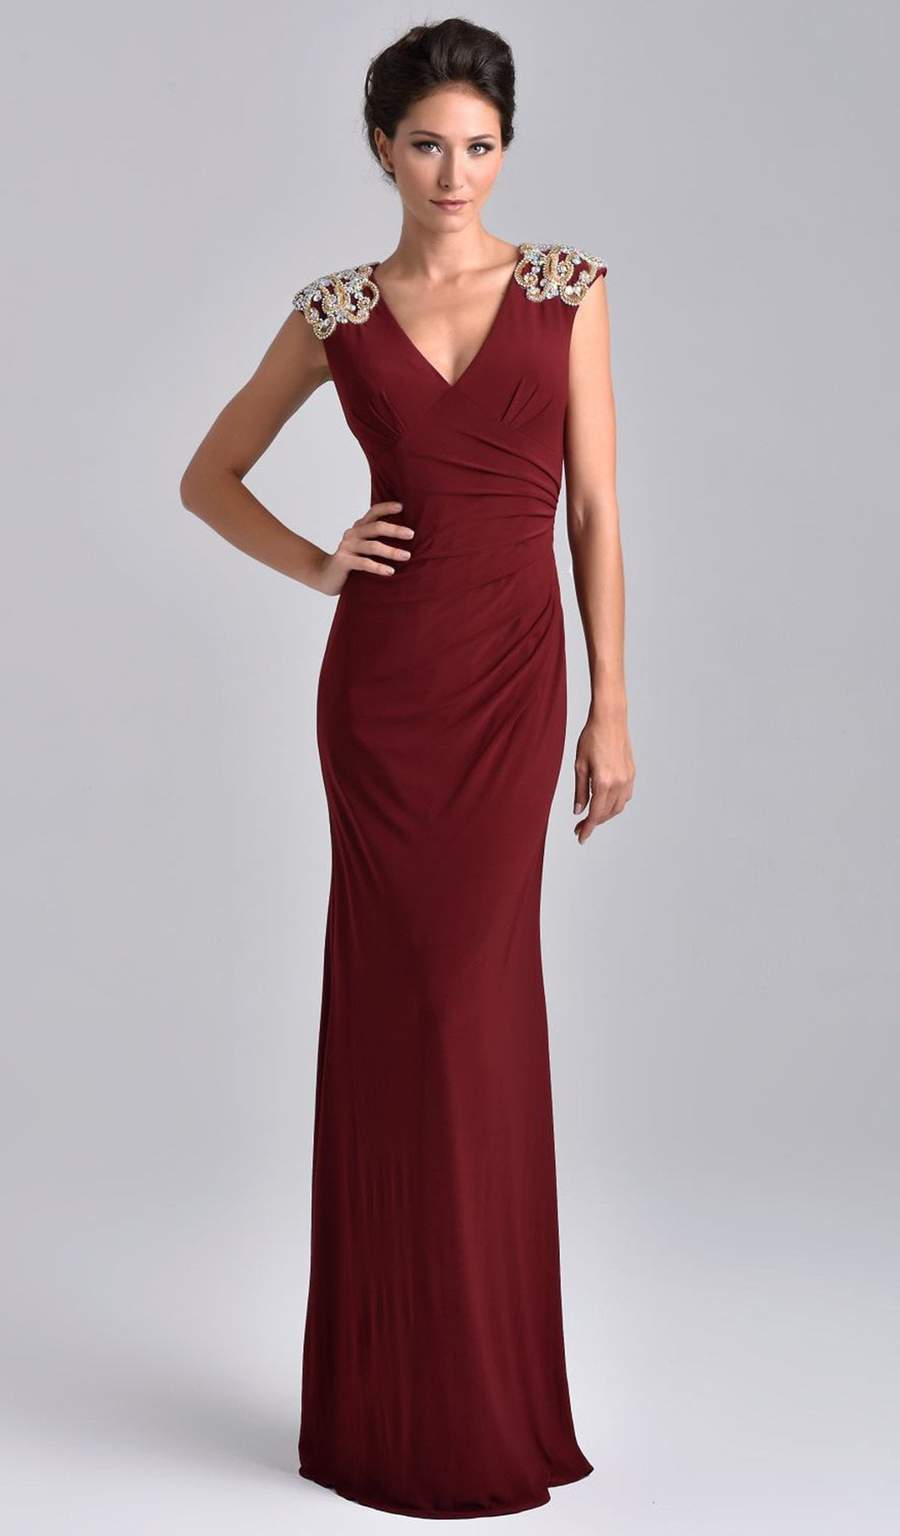 Nina Canacci M206 Stand tall and straight in Nina Canacci M206. This refined long gown features a deep V-neckline and cap sleeves. Delicate patterns of compressed beads patches the shoulders. Rouge forms on the side and dramatically scatters sideways leaving a semi-fitted silhouette look. The long skirt drops perfectly and nearly touches the floor leaving an elegant hemline. Available Sizes: 6, 8, 10  Available Colors: Burgundy, Navy, Taupe